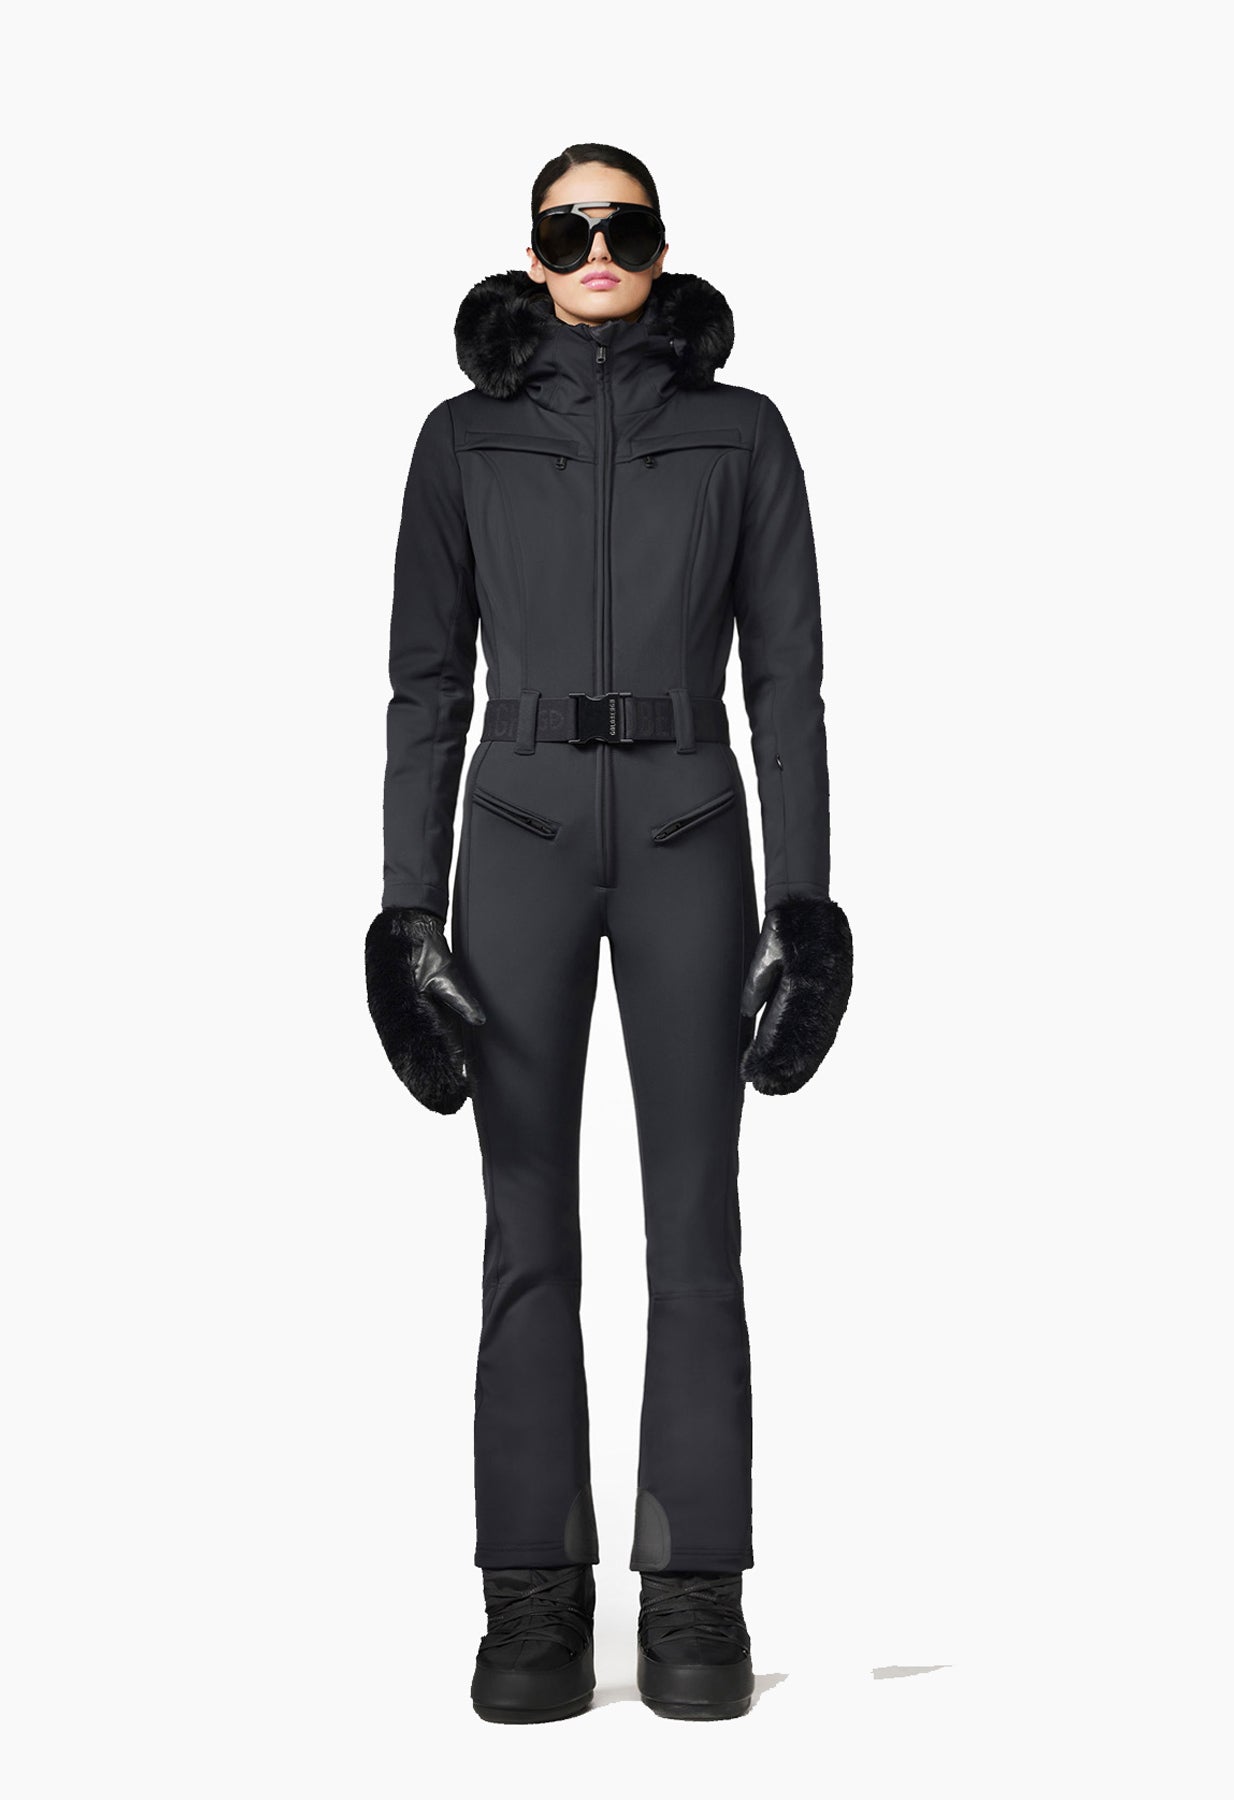 Goldbergh Parry One Piece Ski Suit in Black with Faux Fur Hood